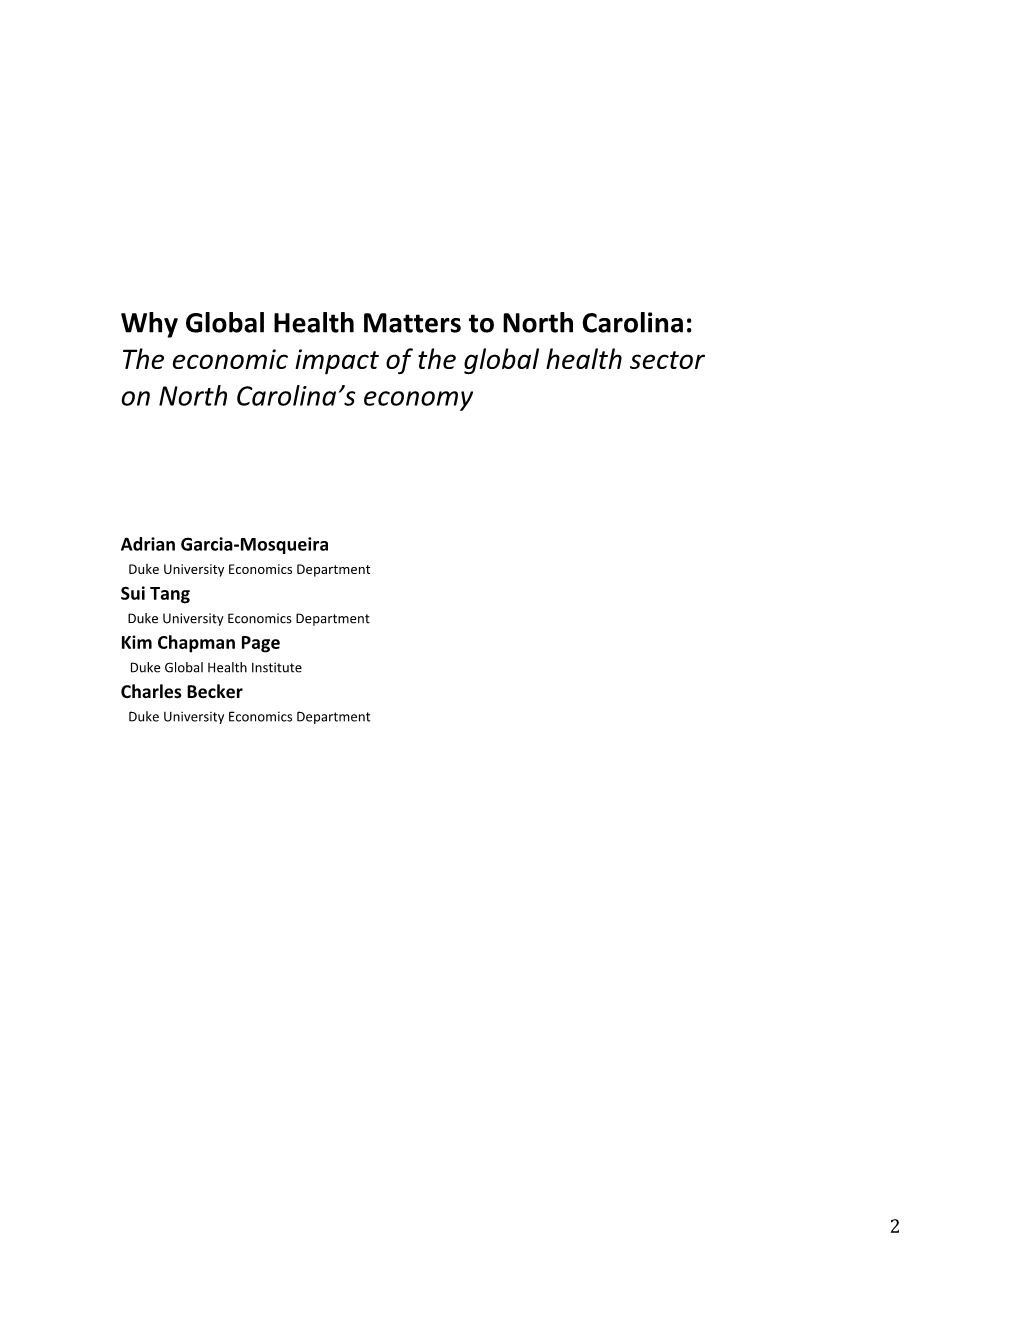 The Economic Impact of the Global Health Sector on North Carolina's